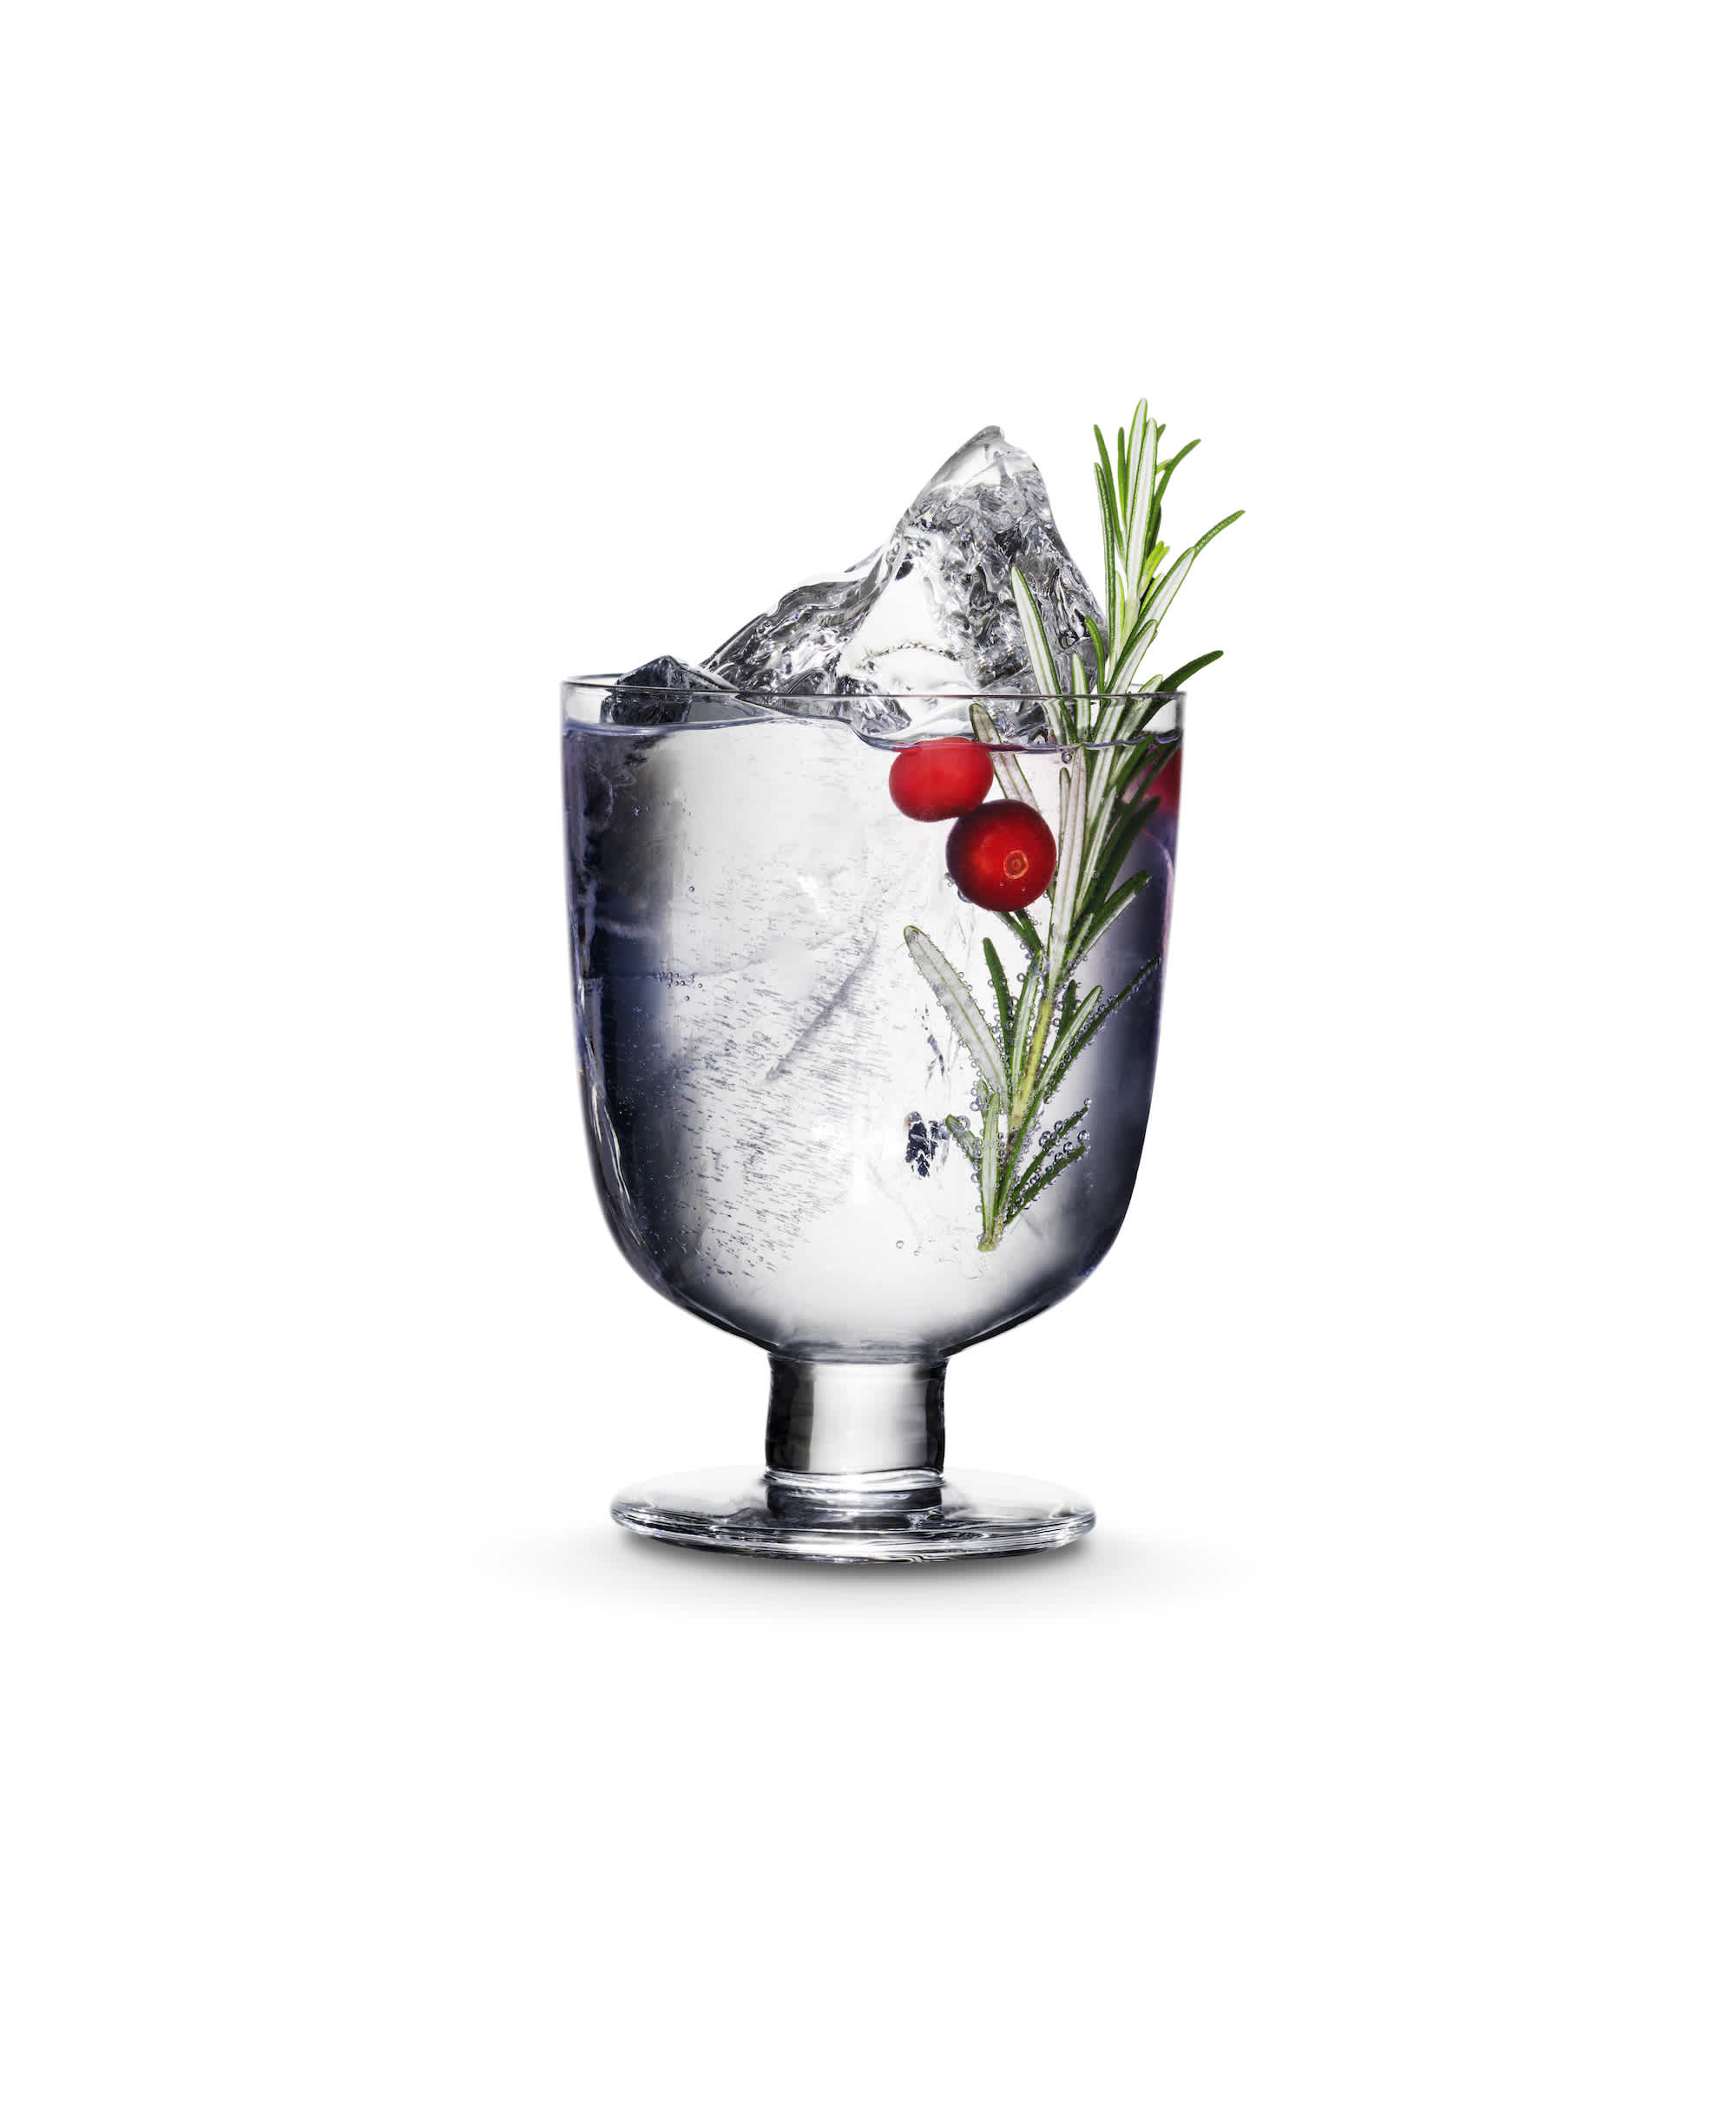 Kyrö Gin & Tonic: a cocktail glass filled with Kyrö Gin, Fever-Tree Indian Tonic Water, cranberries, rosemary, and hand-cut ice. 